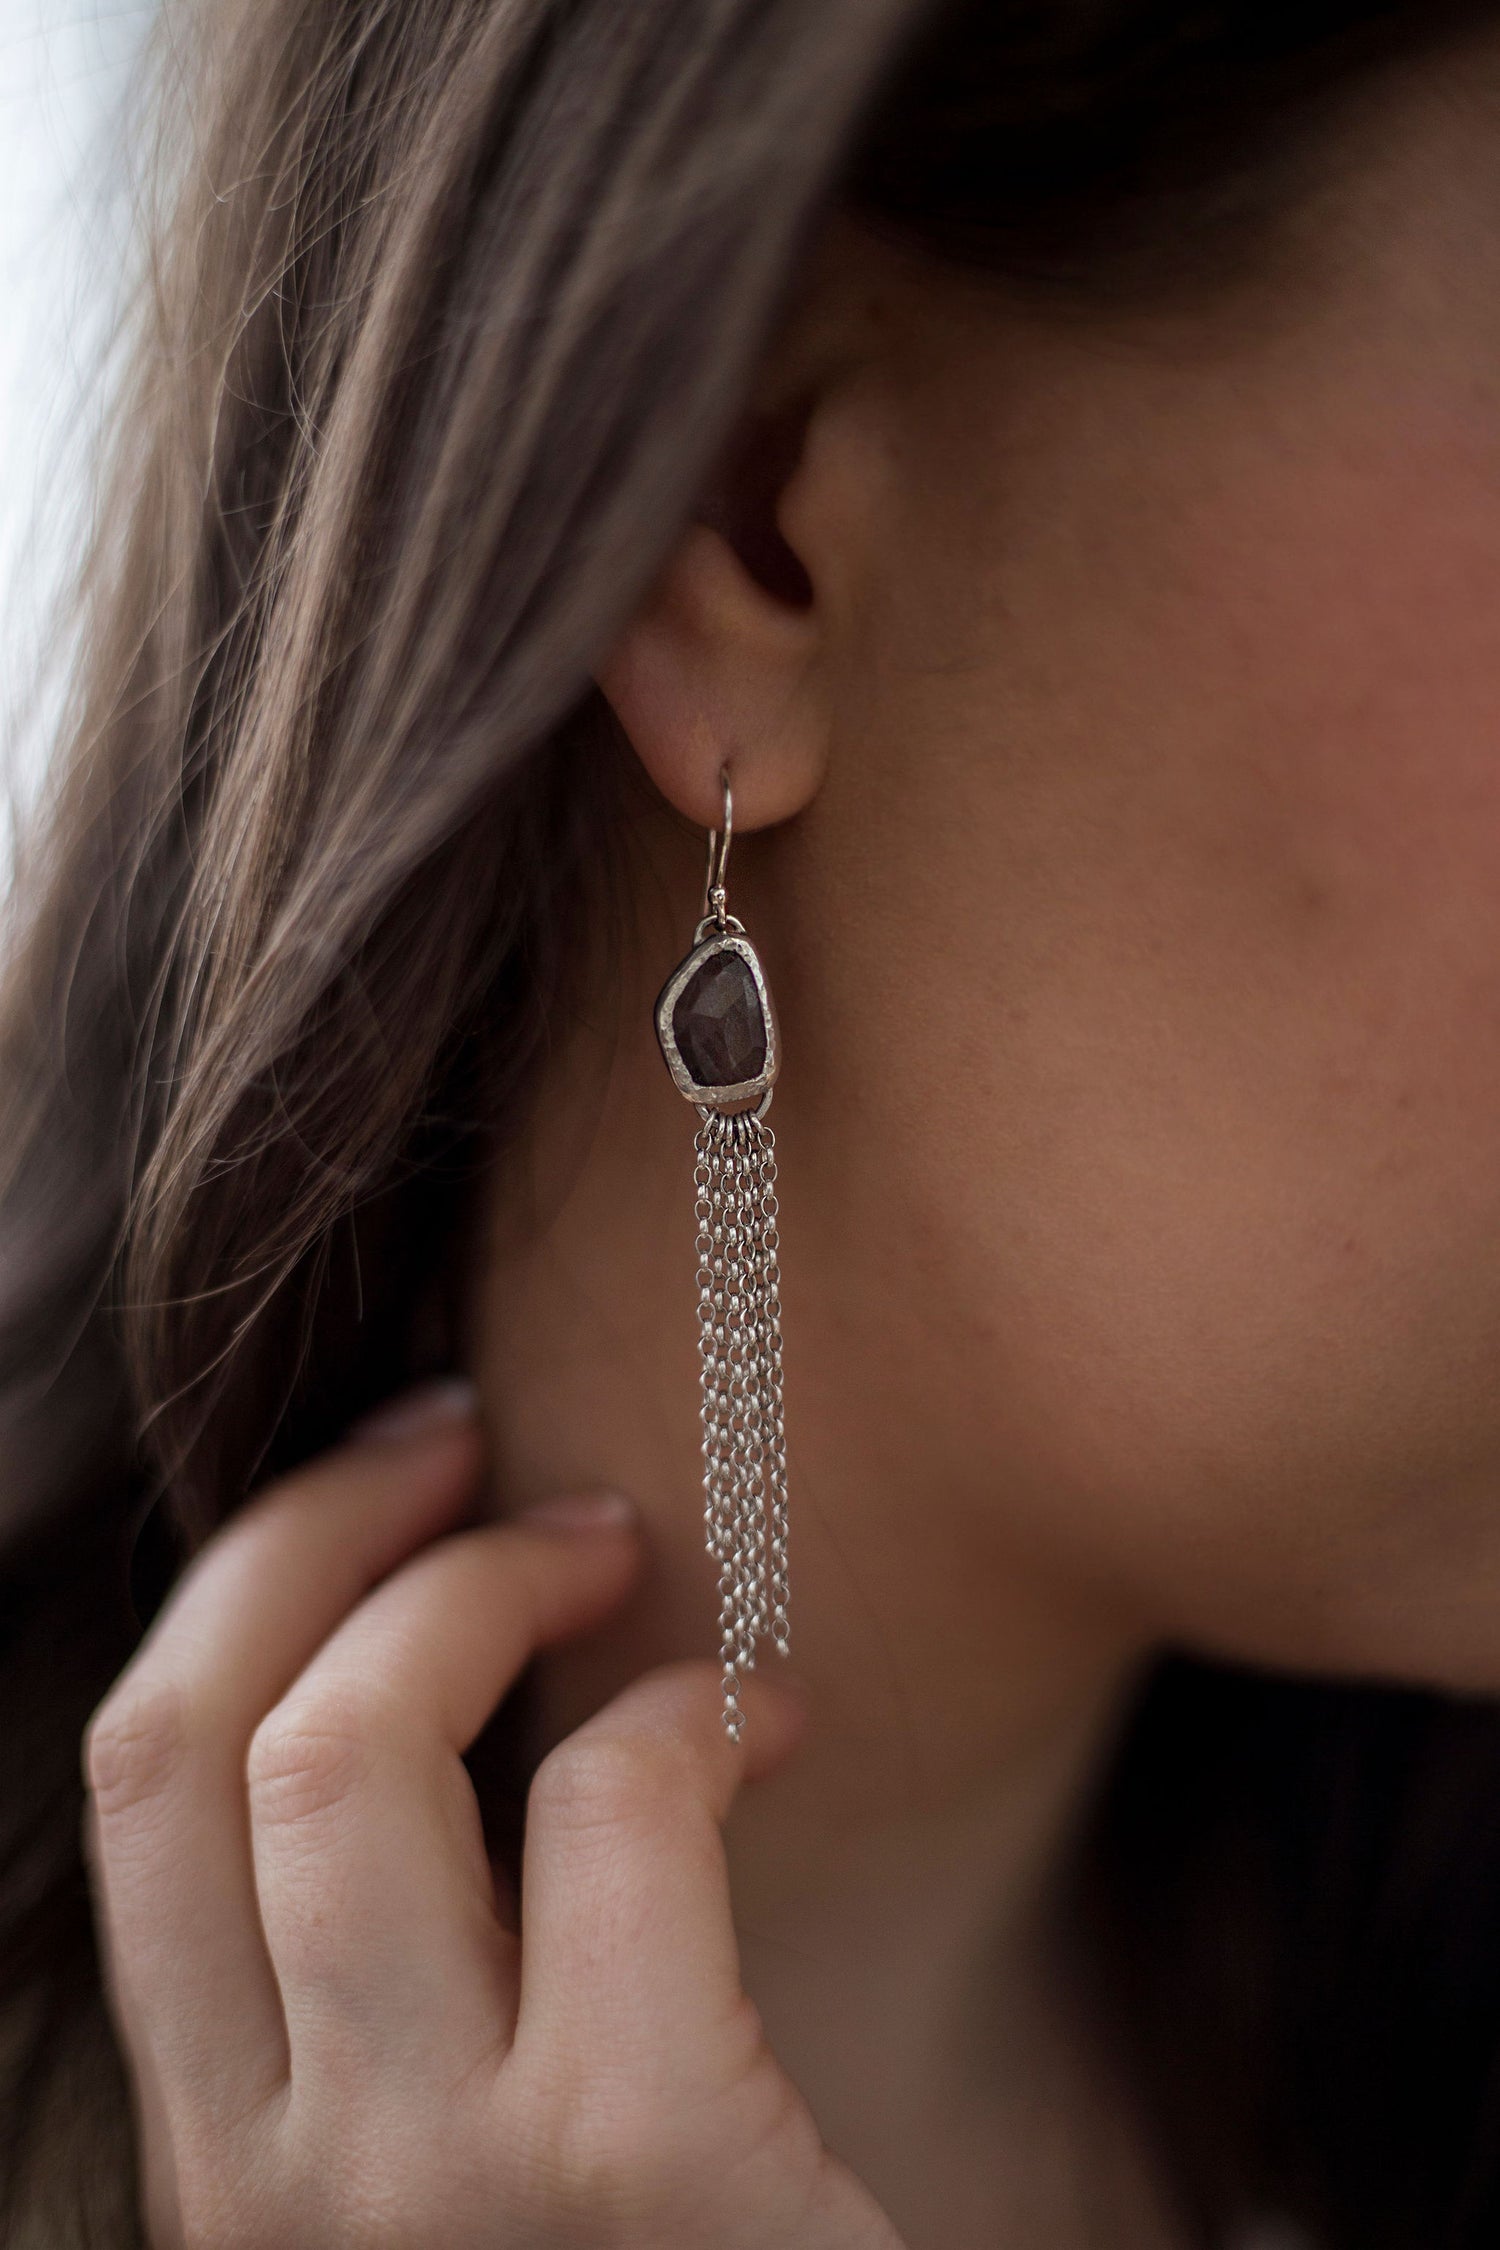 Silver drop earring with large gem stone in a abstract shape with delicate strands of silver chain hanging from the bottom